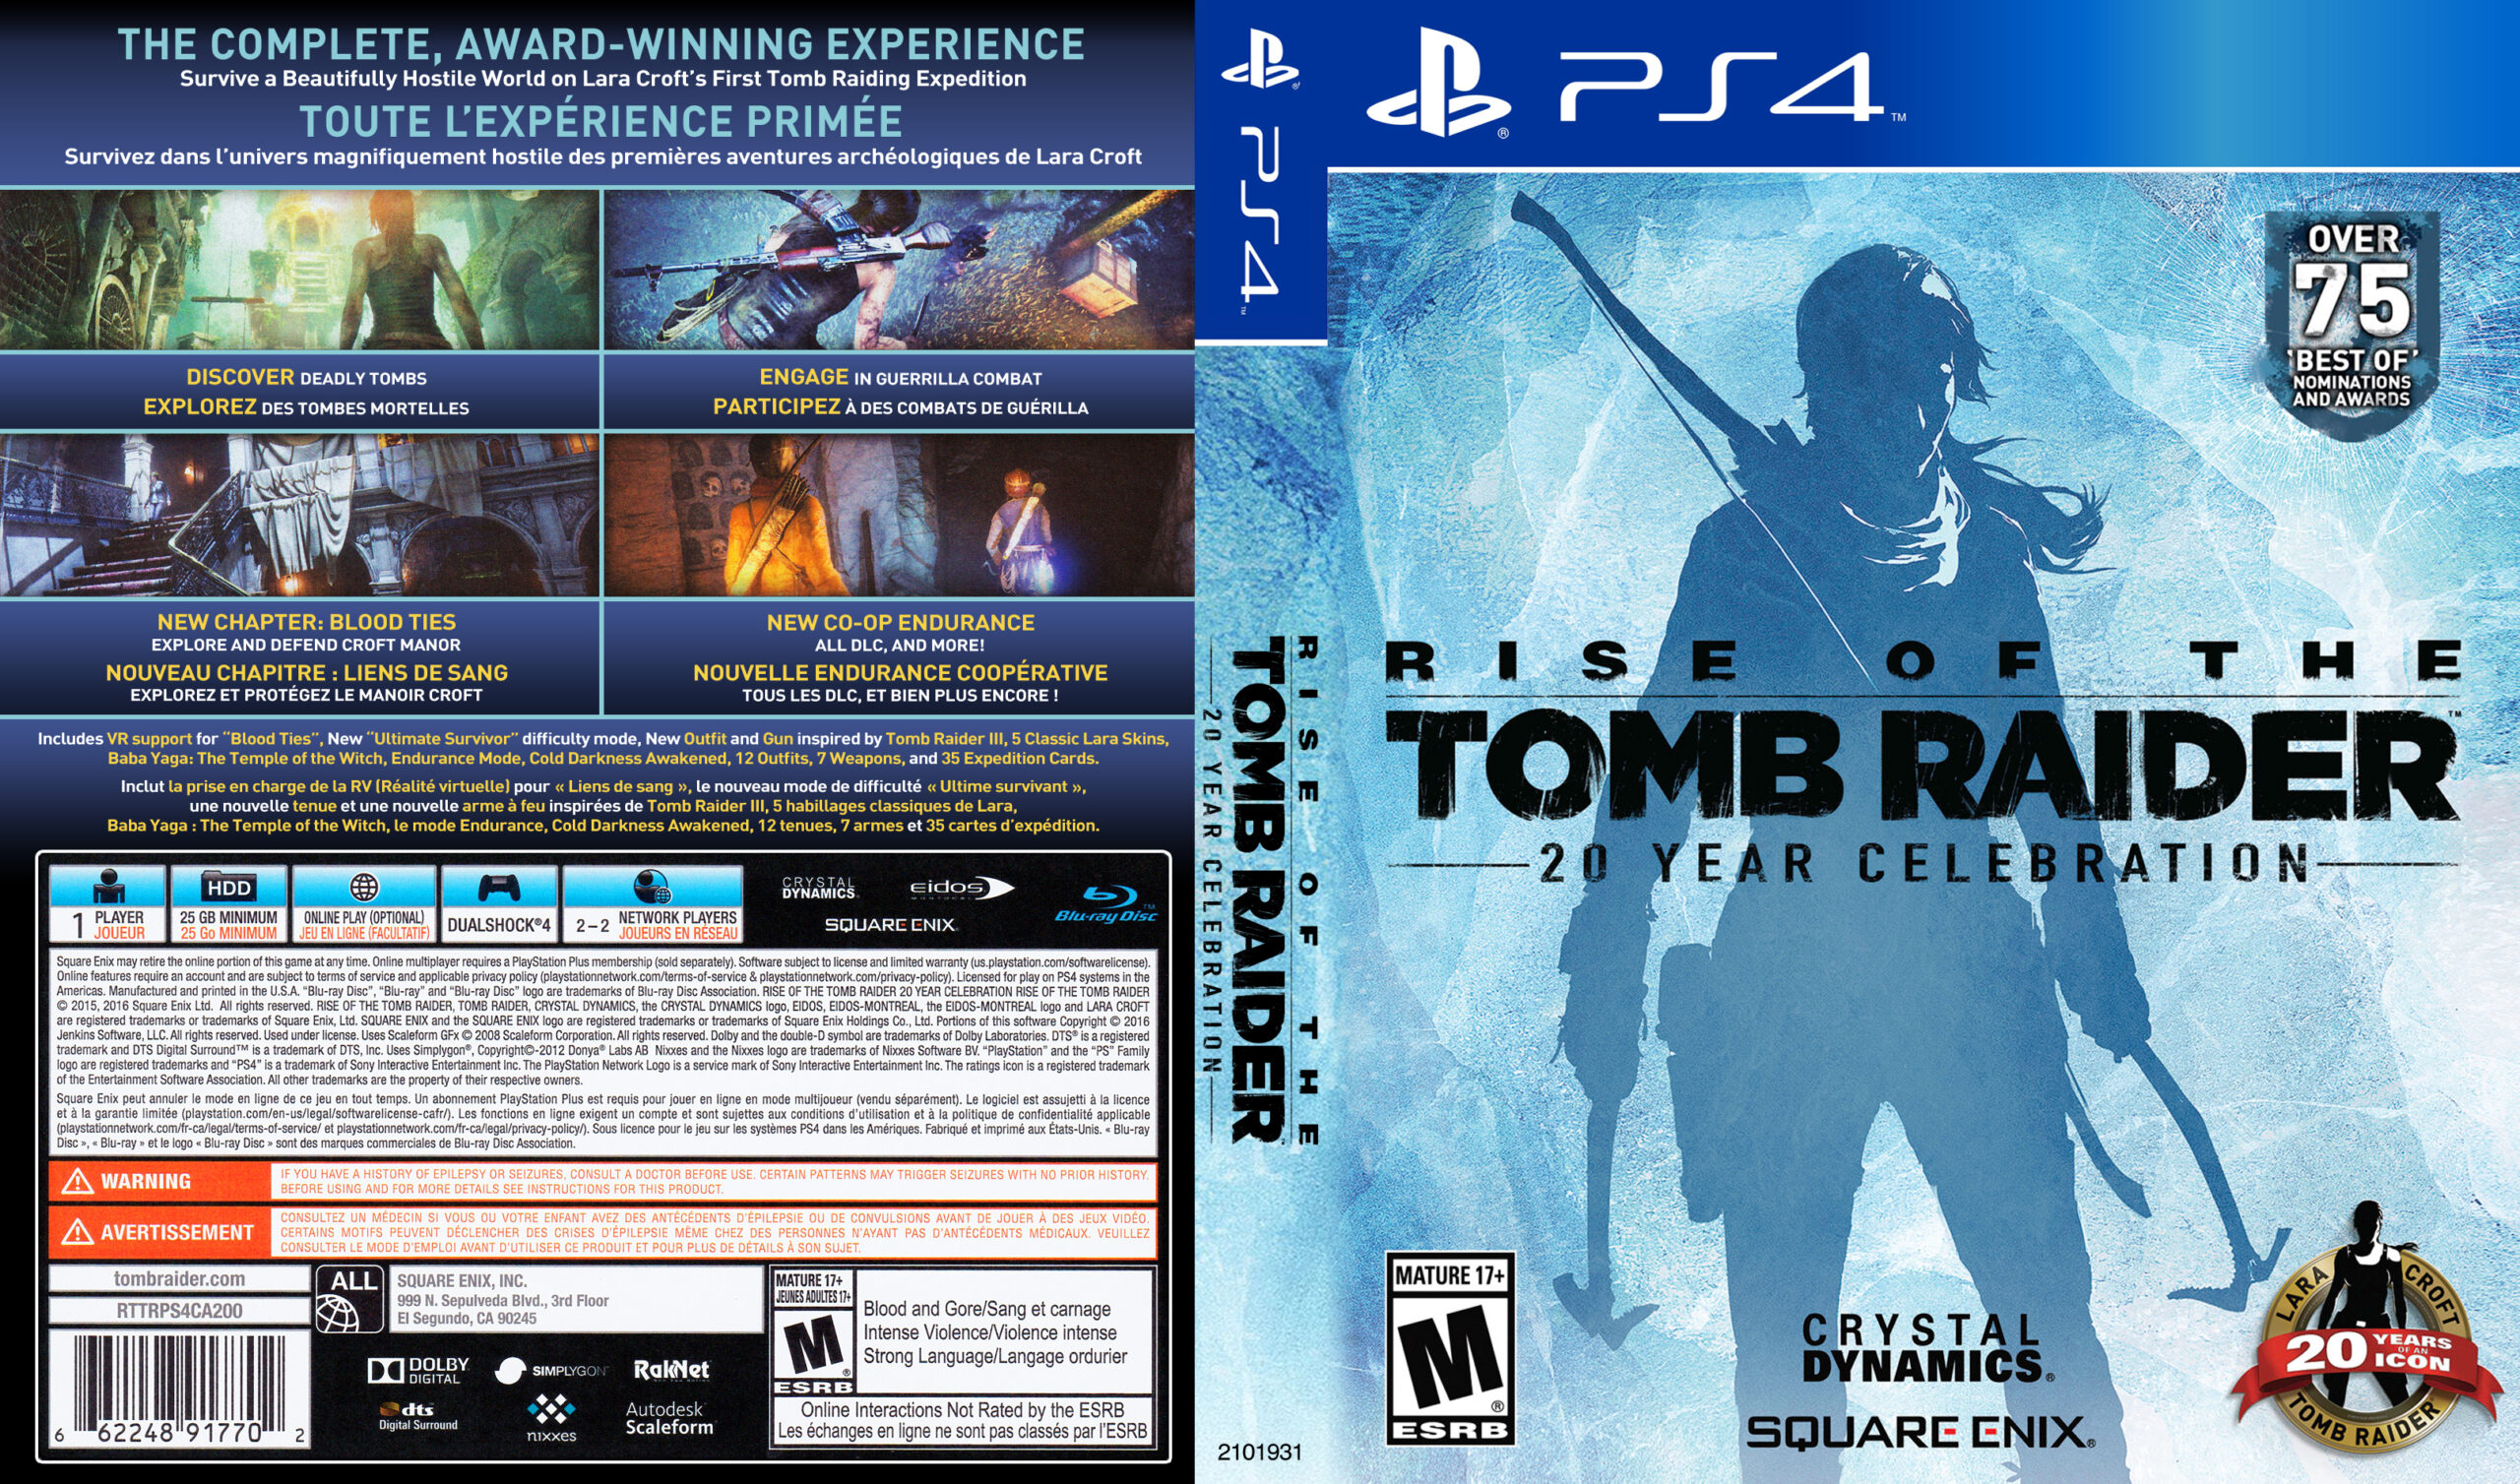 Rise of the Tomb Raider 20 Year Celebration CUSA05716 PS4 PKG auctor